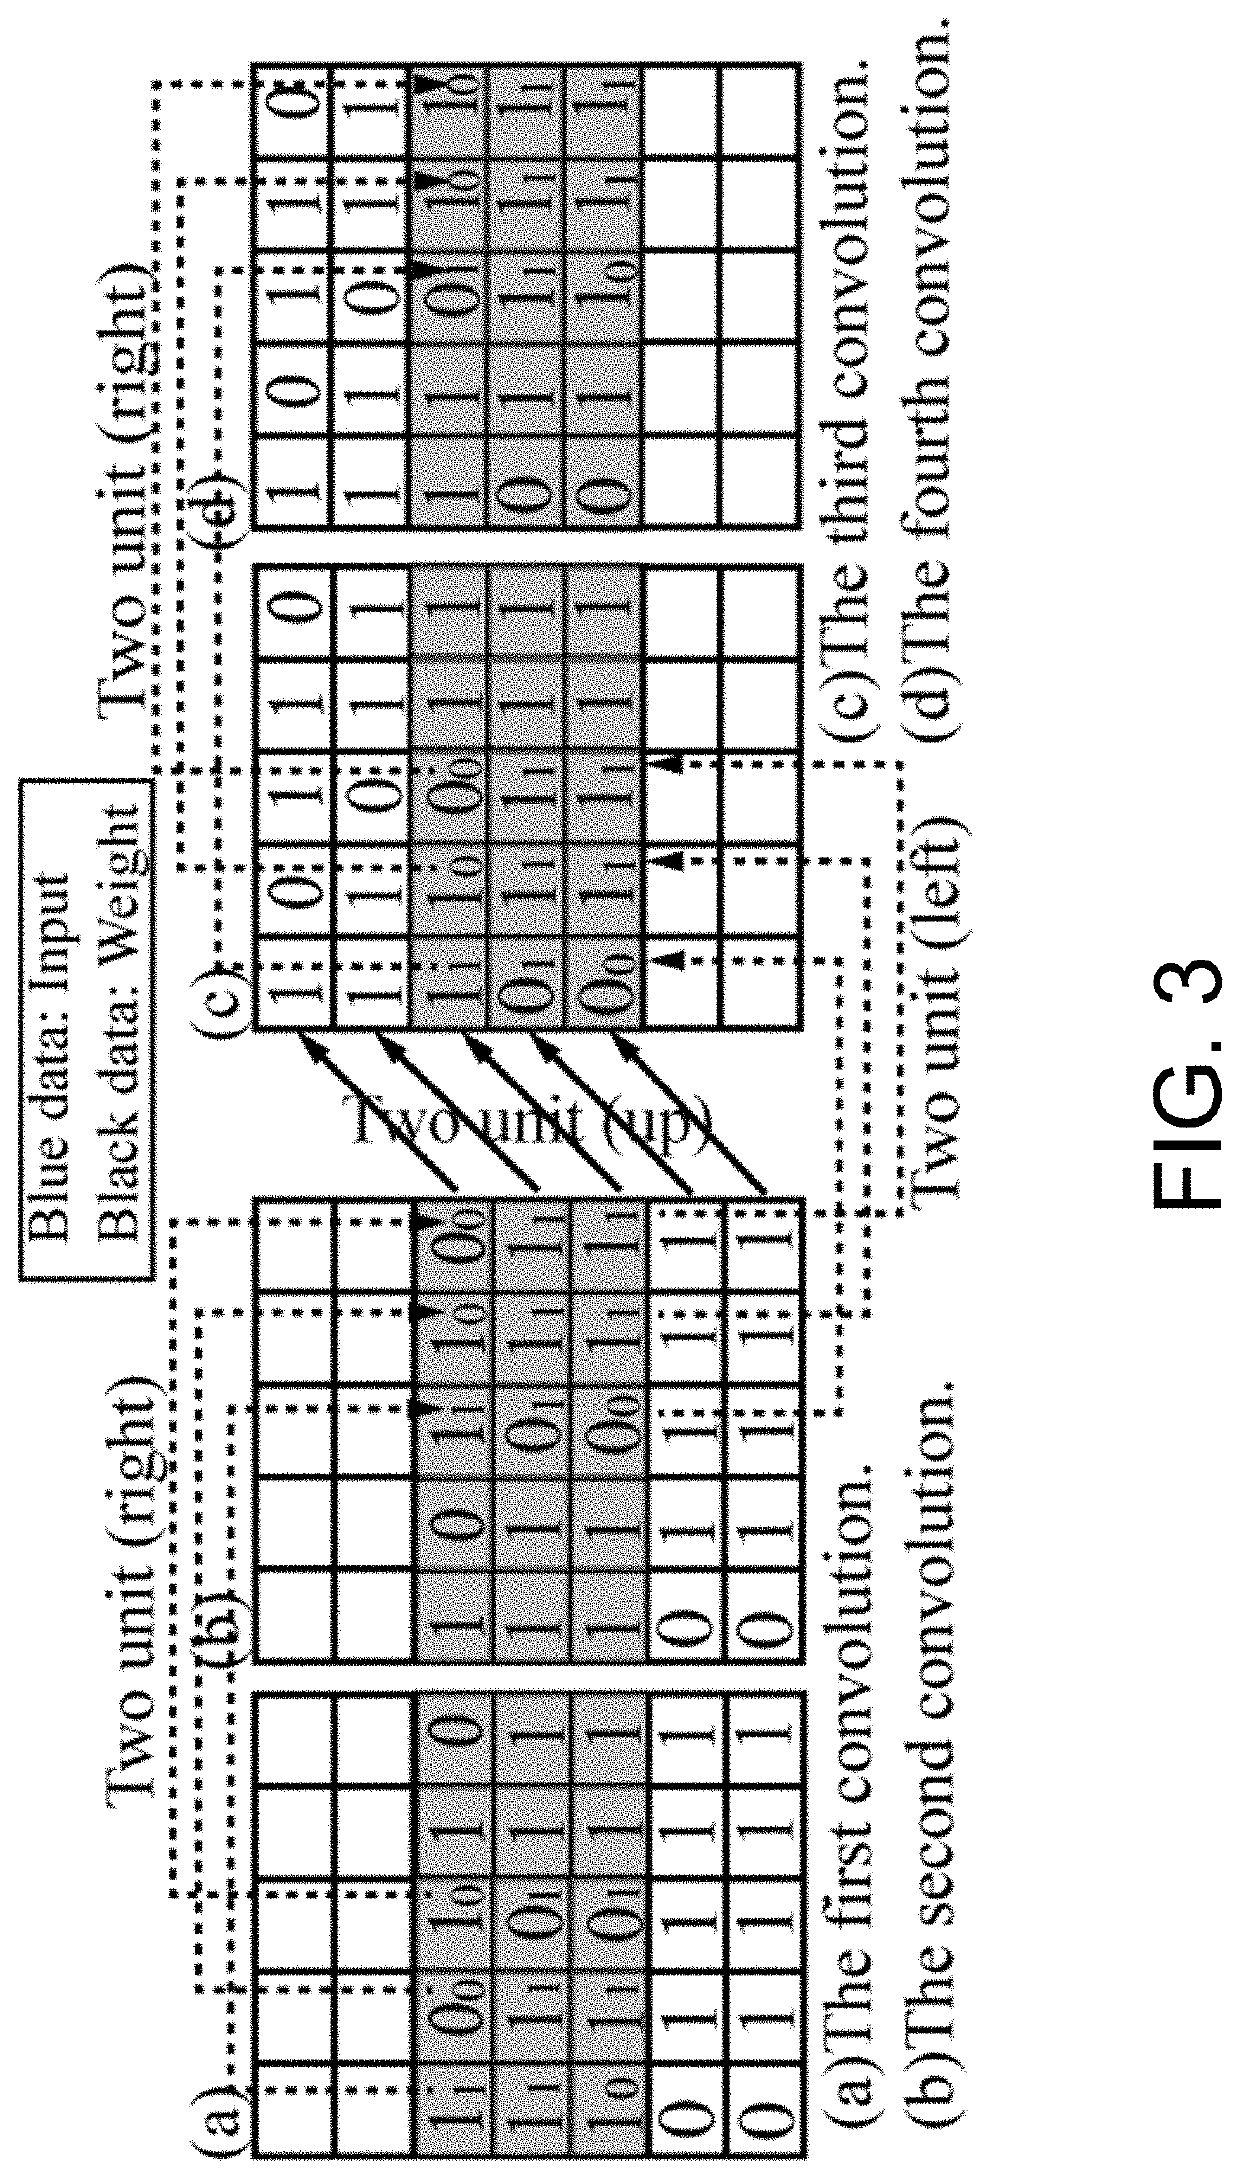 Computing in-memory system and method based on skyrmion racetrack memory